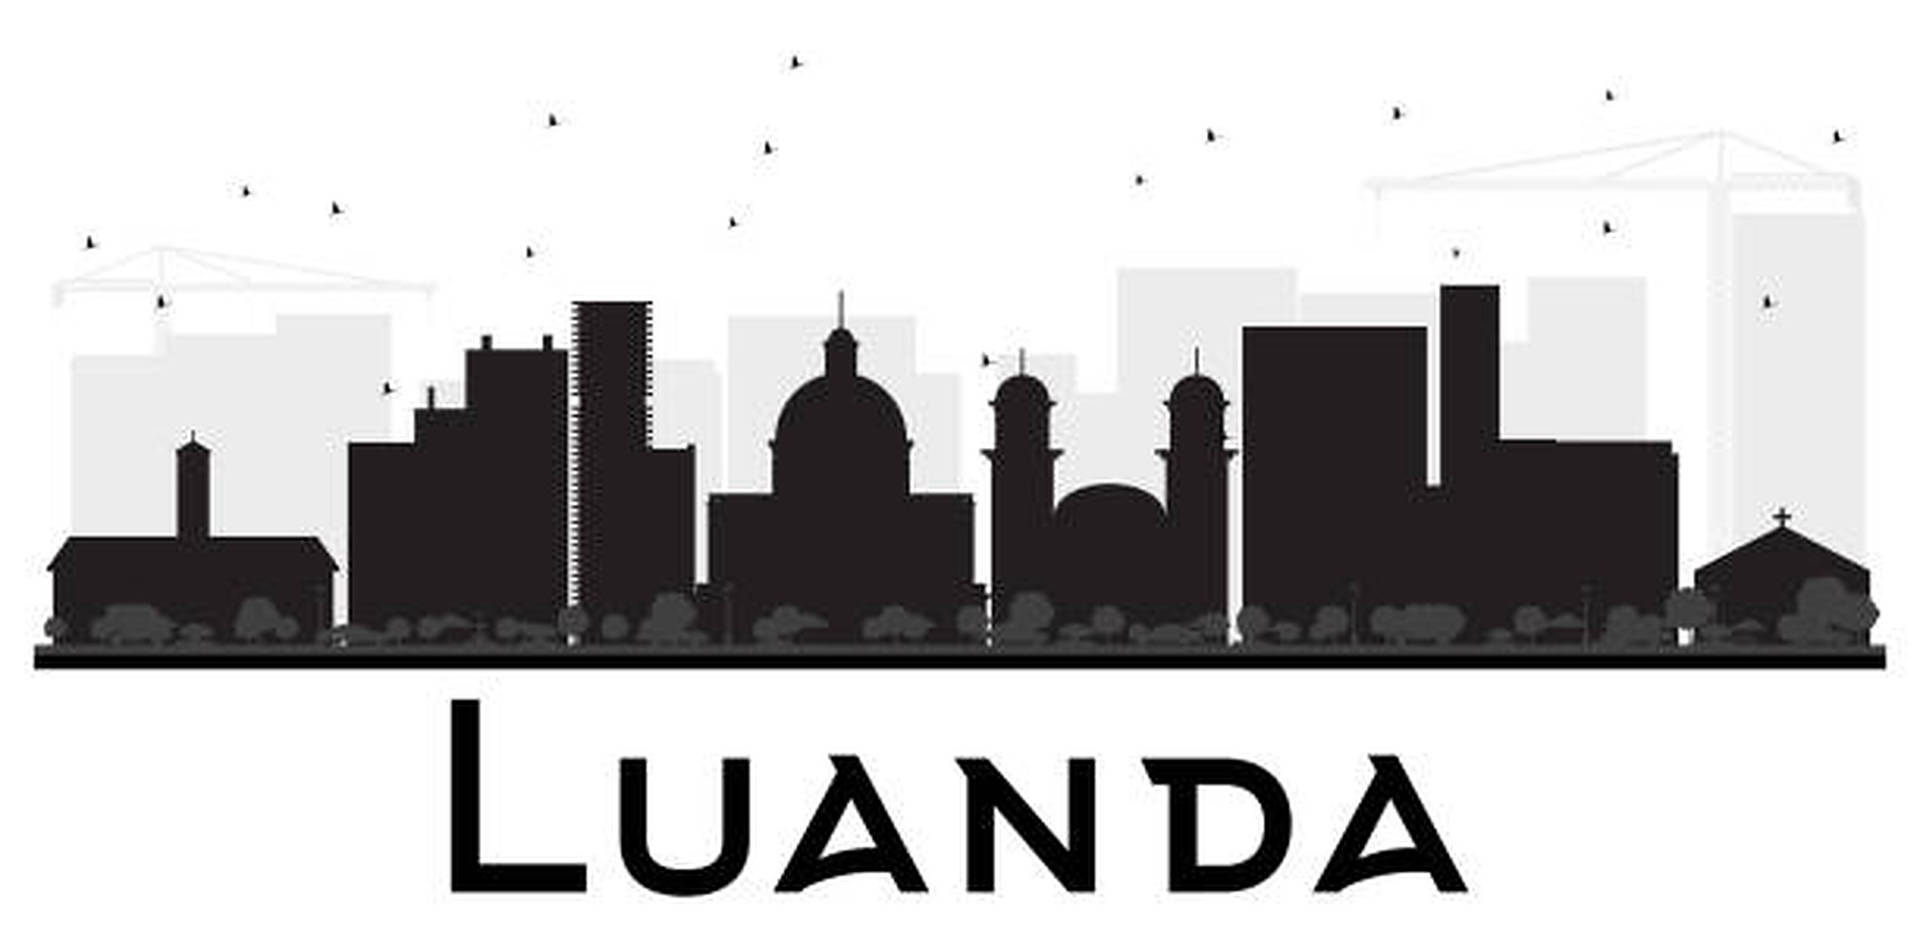 Luandaangola Silhouette Can Be Translated To German As 